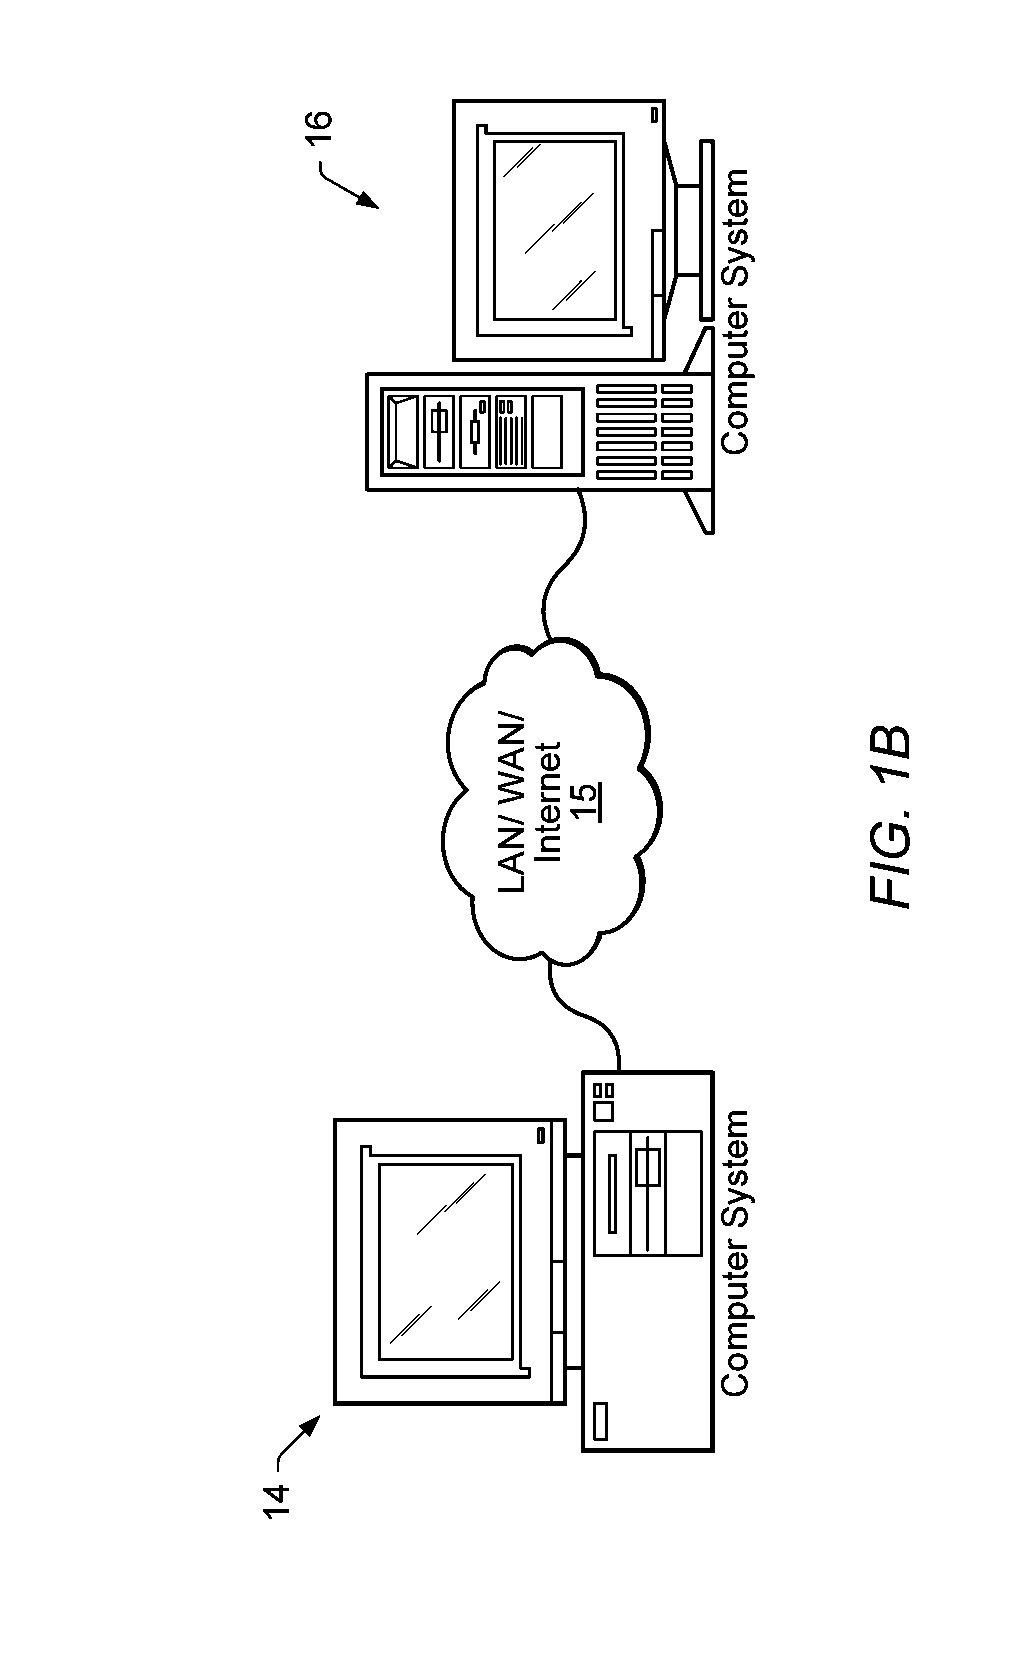 Automatically Generating a Graphical Data Flow Program Based on a Circuit Diagram